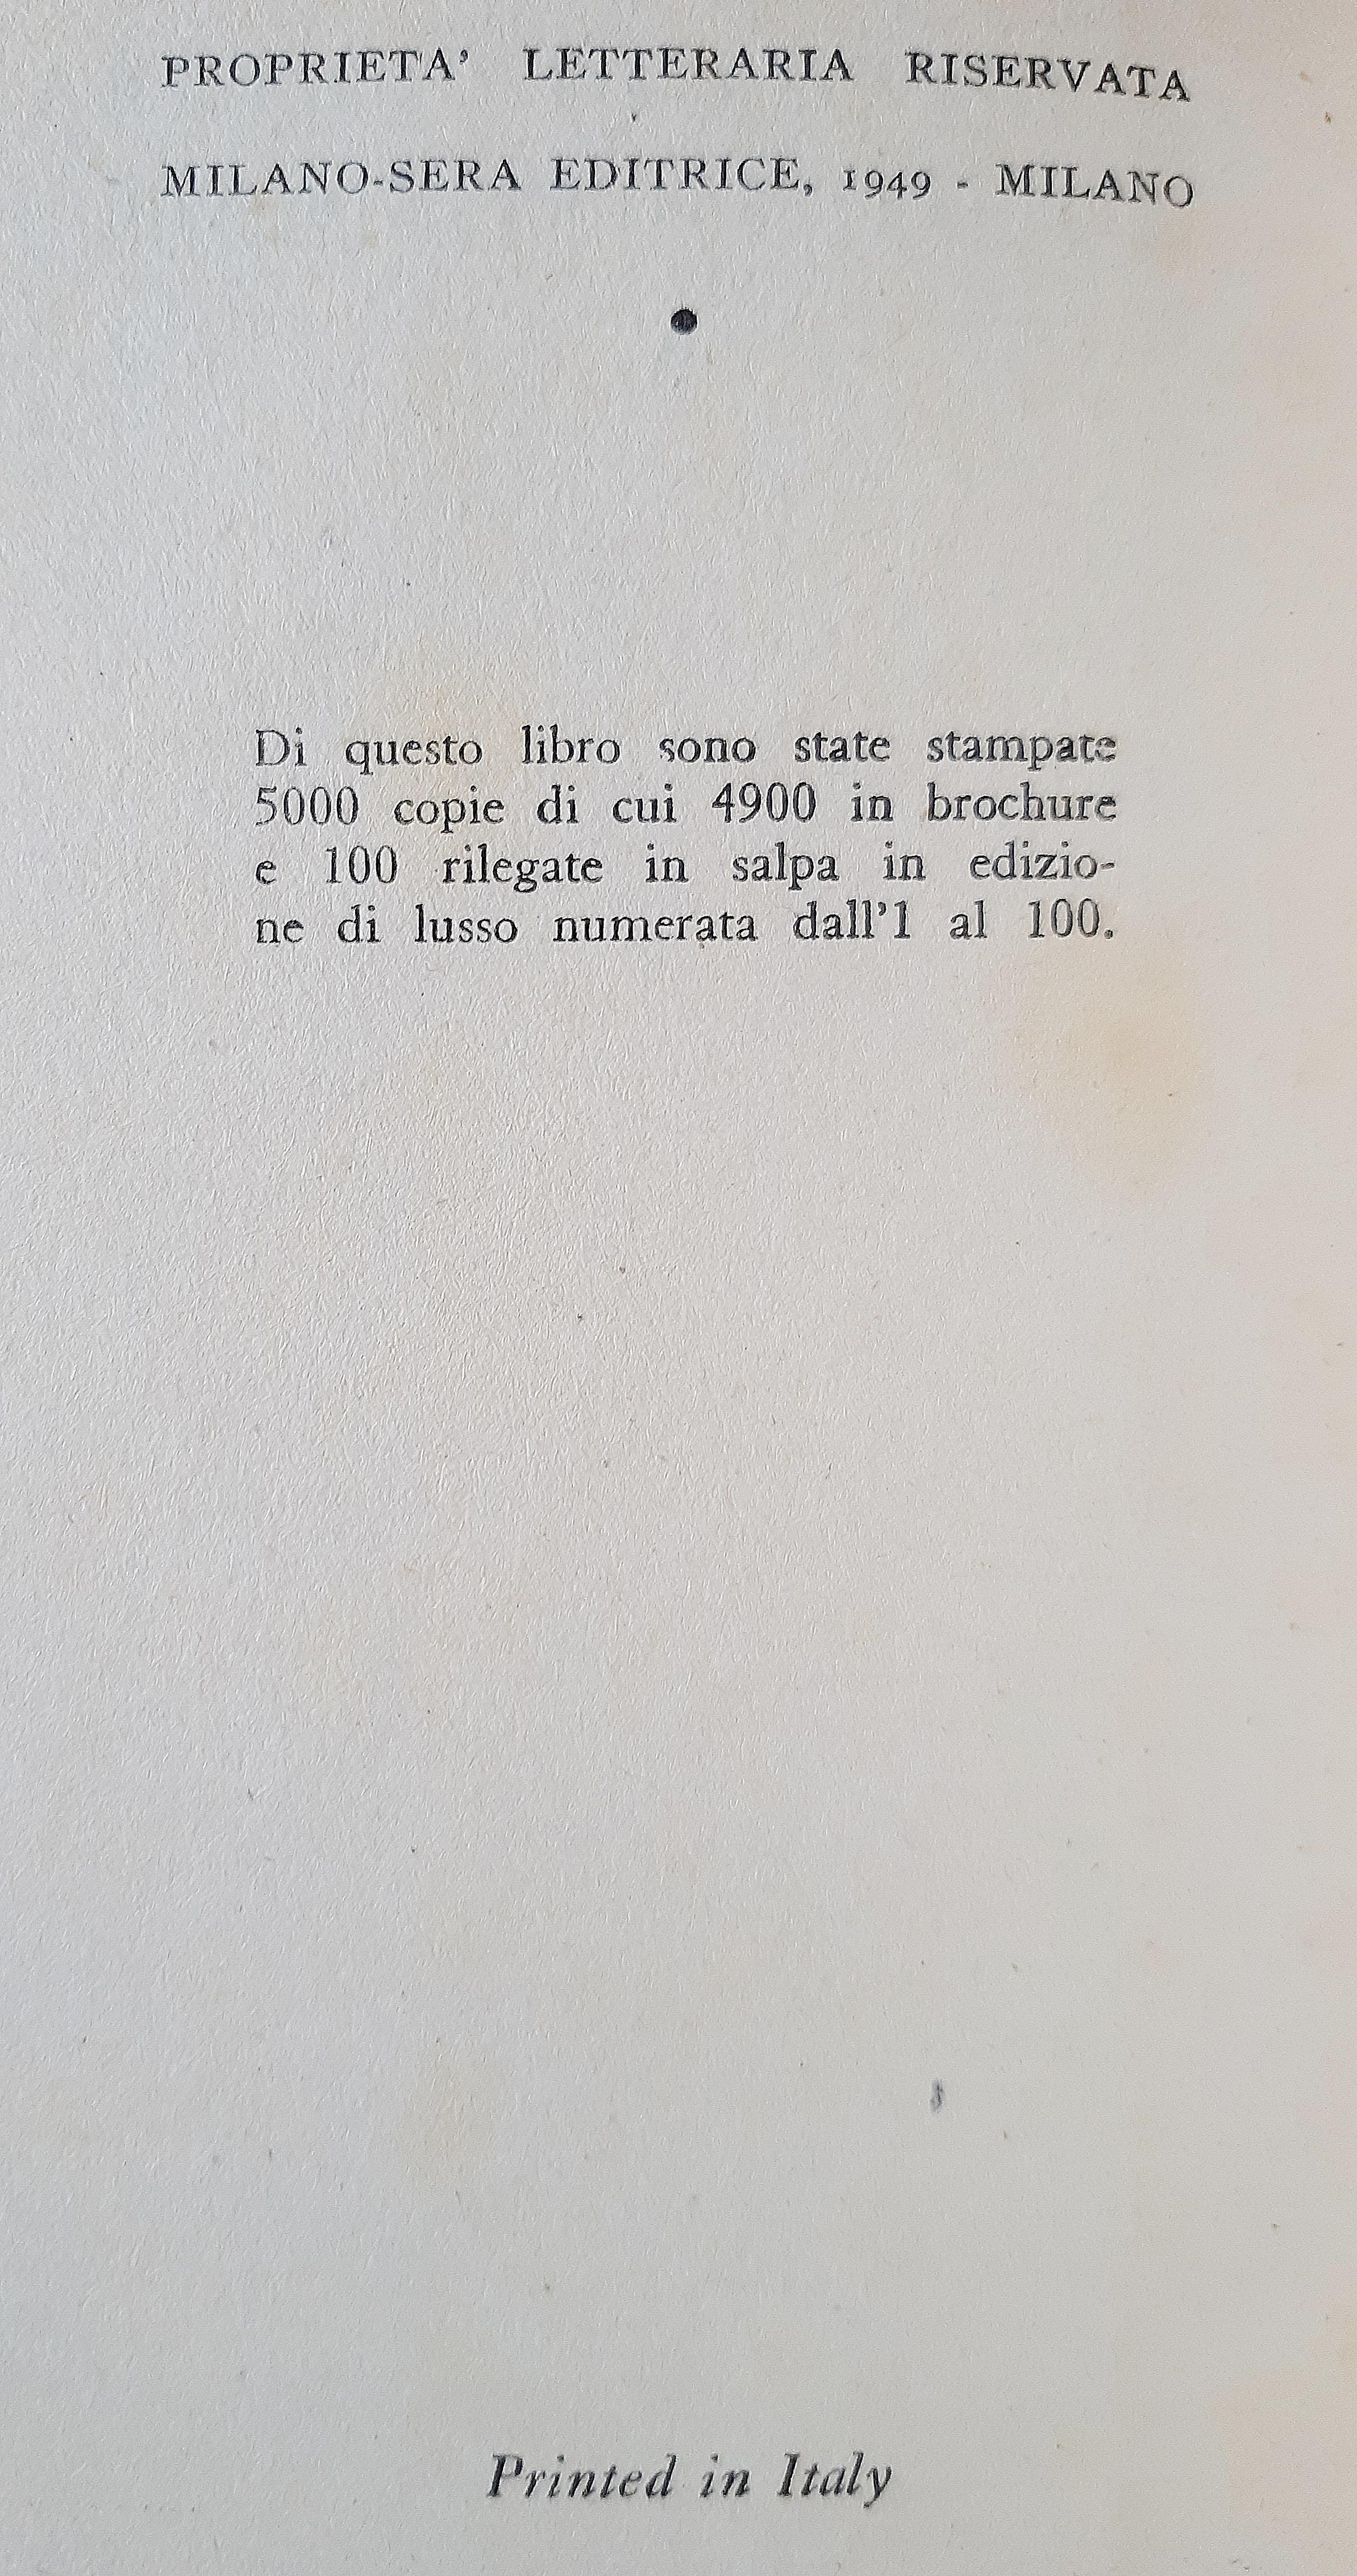 La Coda di Paglia is an original modern rare book illustrated by Mino Maccari (Siena,  1898 – Rome, 1989) and written by Alfonso Gatto in 1949.

Original First Edition.

Published by Sera Editrice, Milan.

5000 unnumbered copies.

Format: in 8°. The